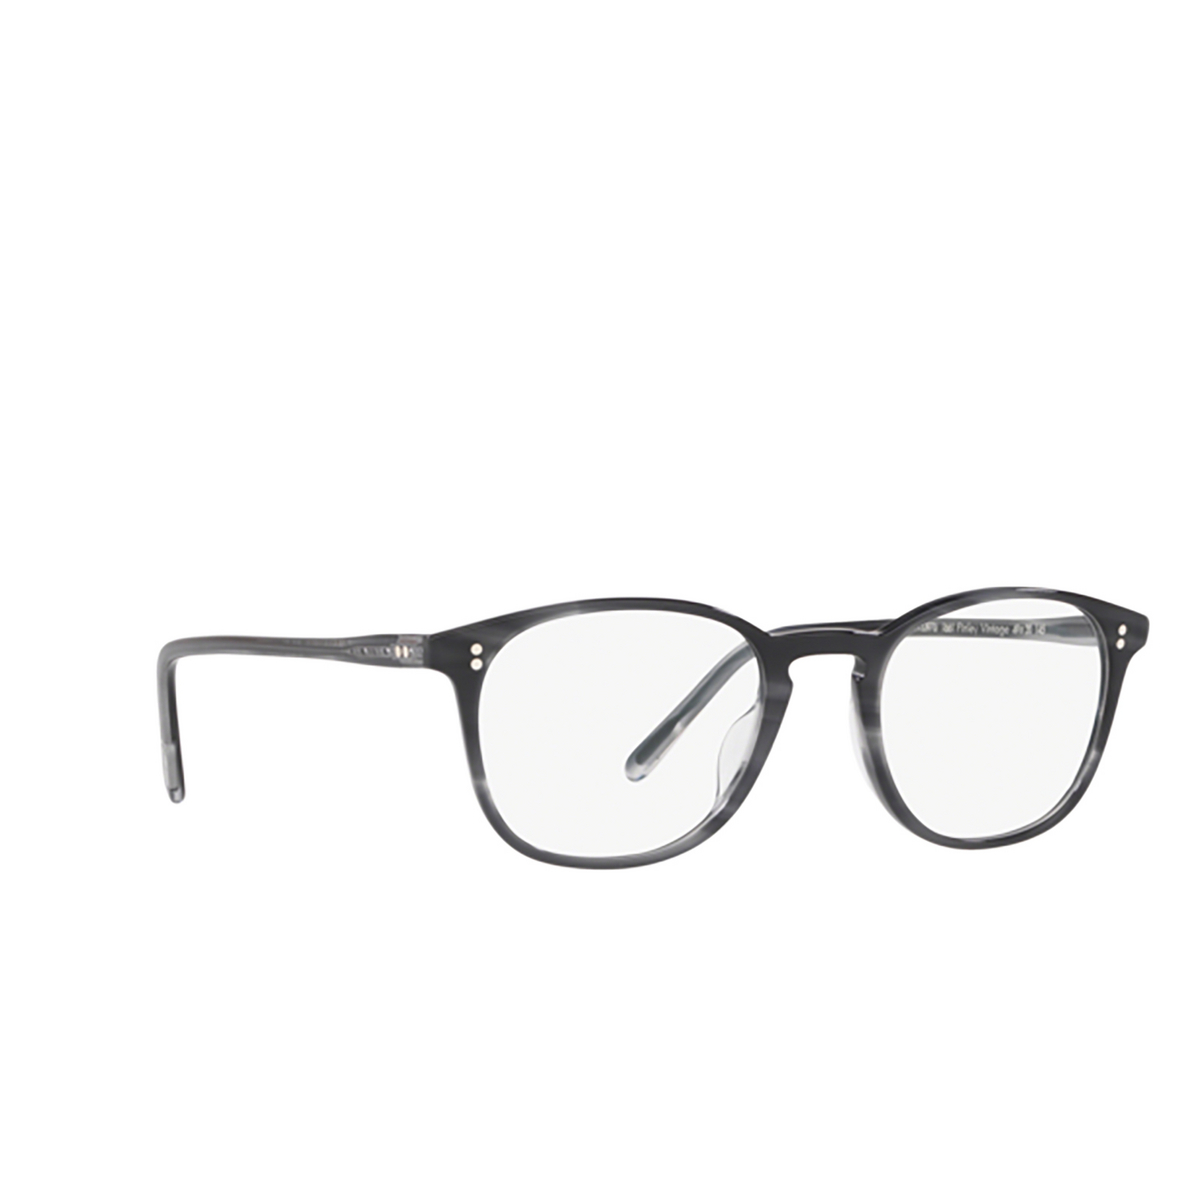 Oliver Peoples FINLEY VINTAGE Eyeglasses 1661 Charcoal Tortoise - three-quarters view